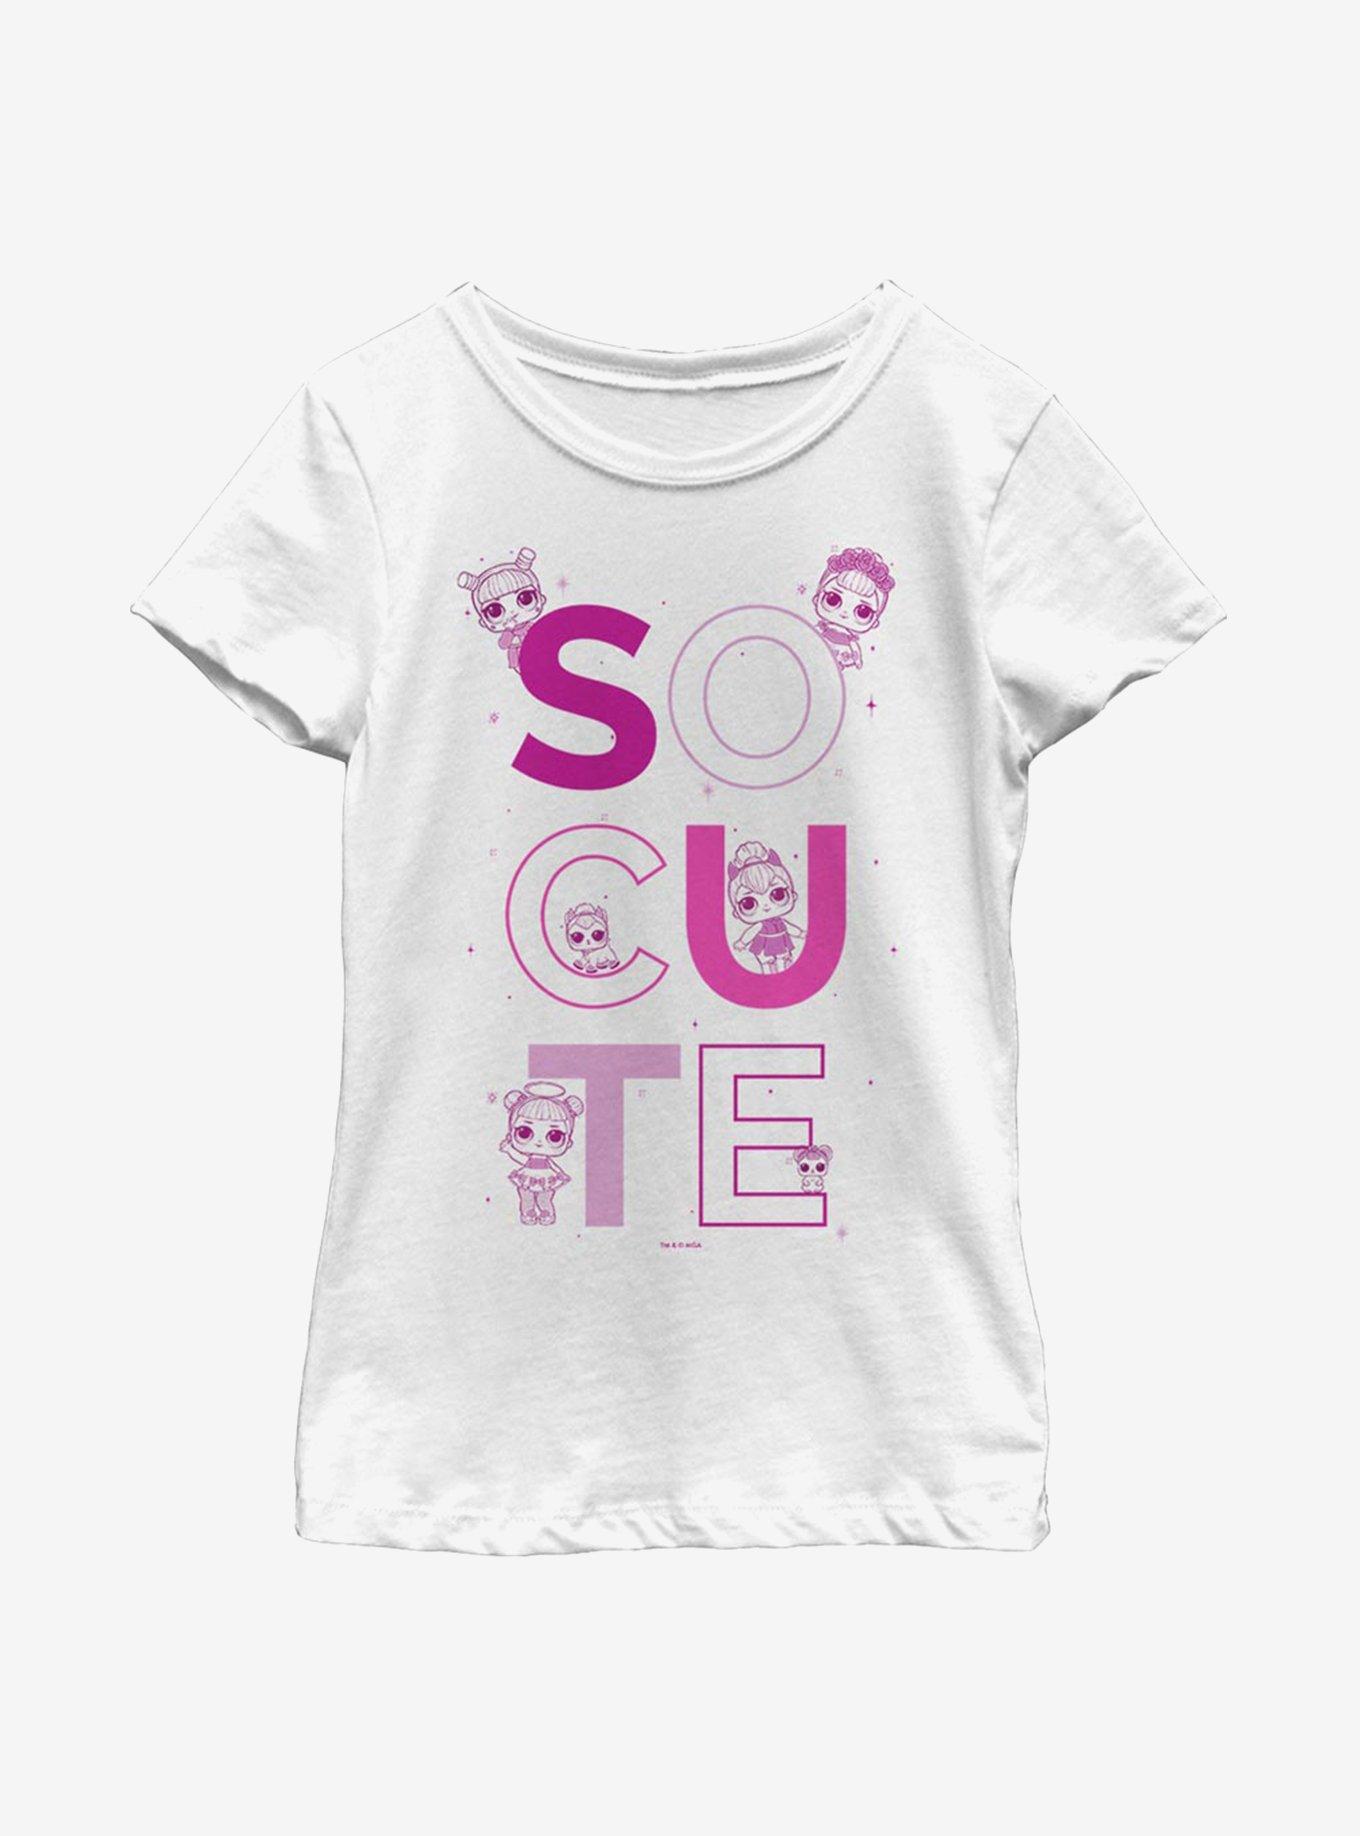 L.O.L. Surprise! Cute Stack Youth Girls T-Shirt, WHITE, hi-res